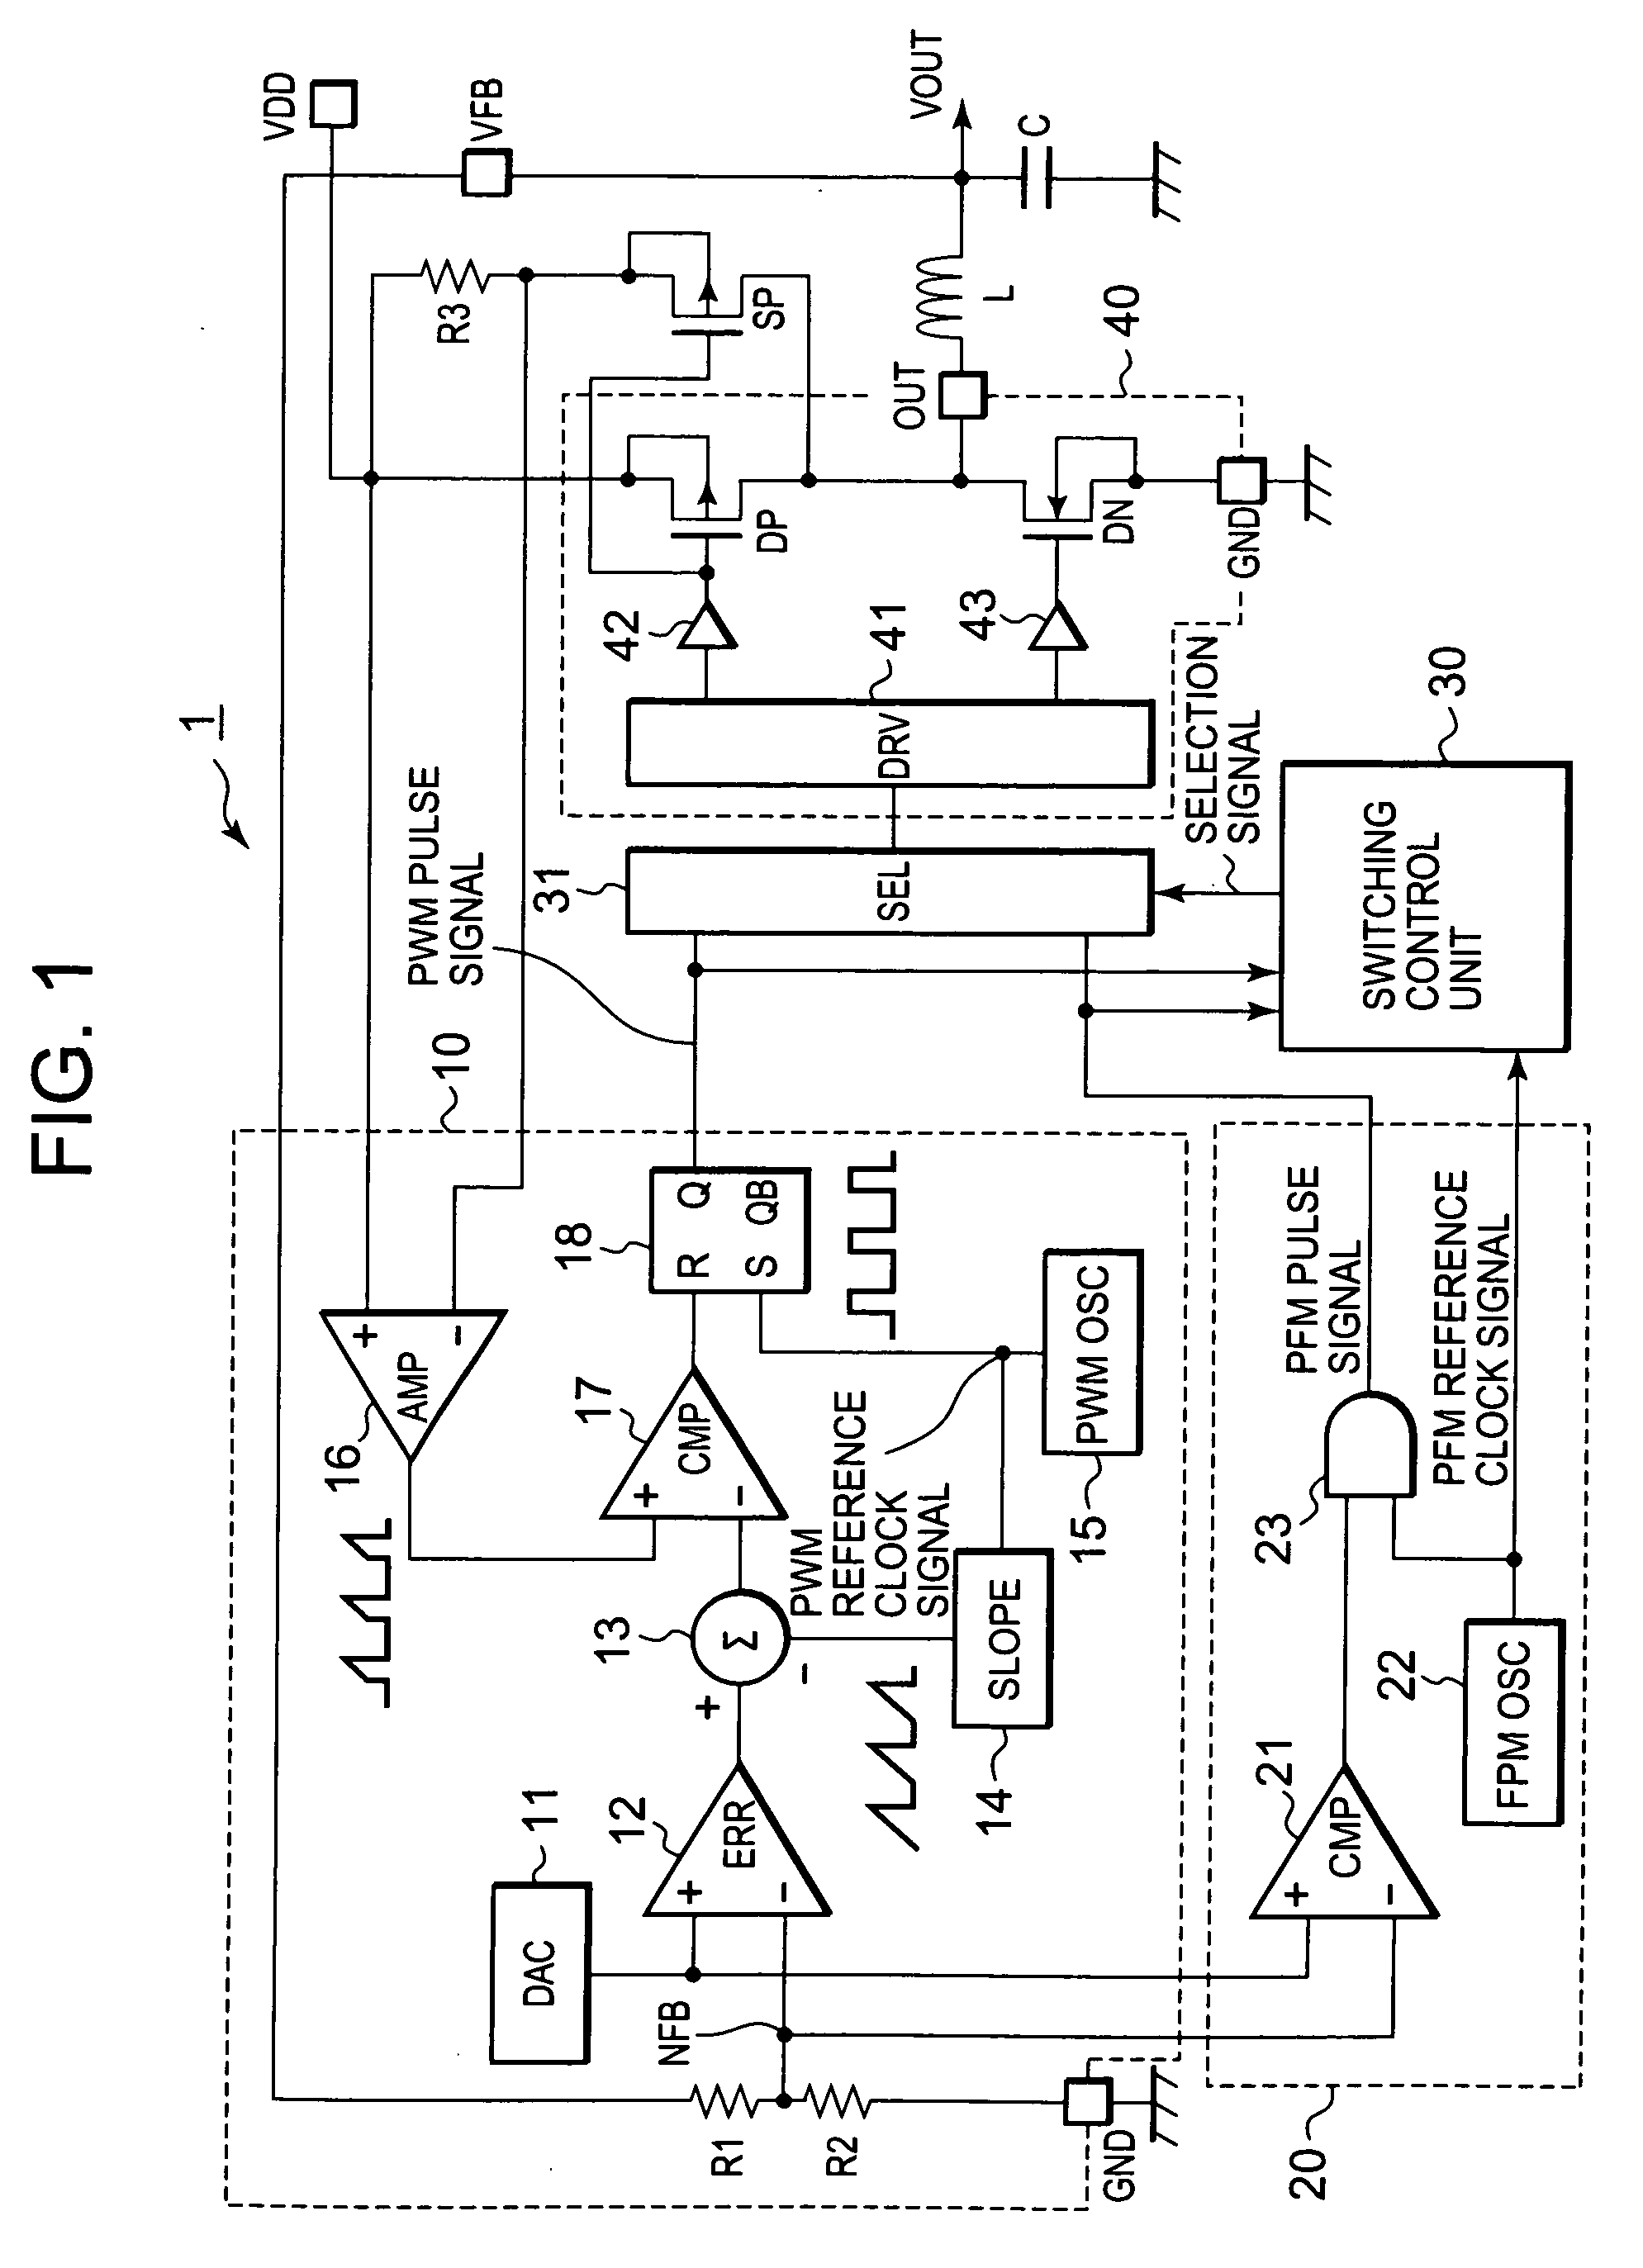 DC converter which has switching control unit to select PWM signal or PFM signal